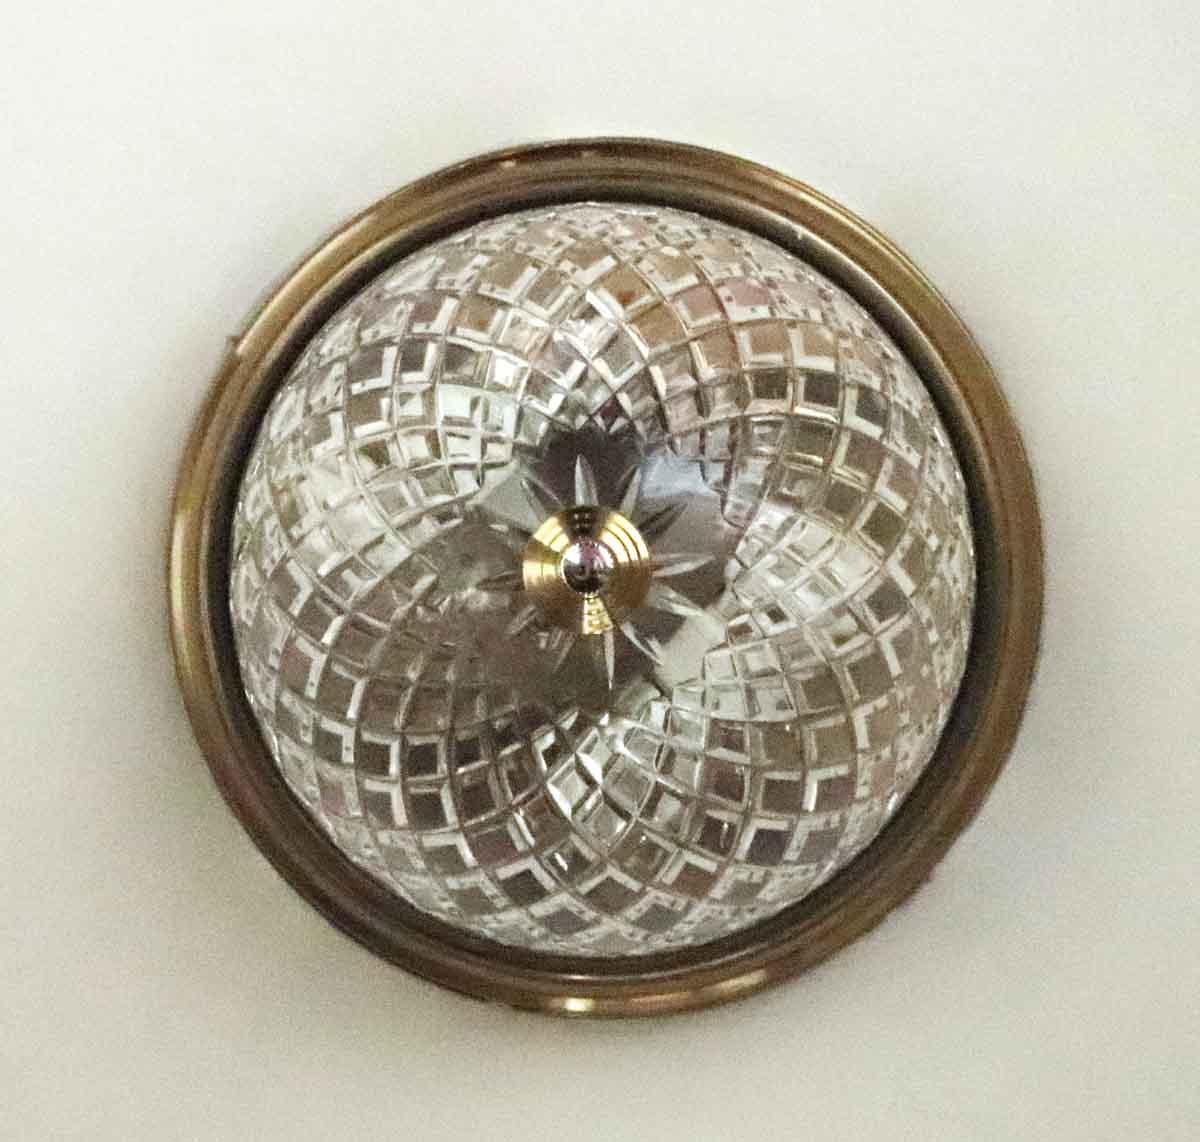 1980s cut crystal flush mount fixture with brass base. These are original to the suites and corridors of the NYC Waldorf Astoria Hotel Towers. Waldorf Astoria authenticity card included with your purchase. Priced each. Small quantity available at